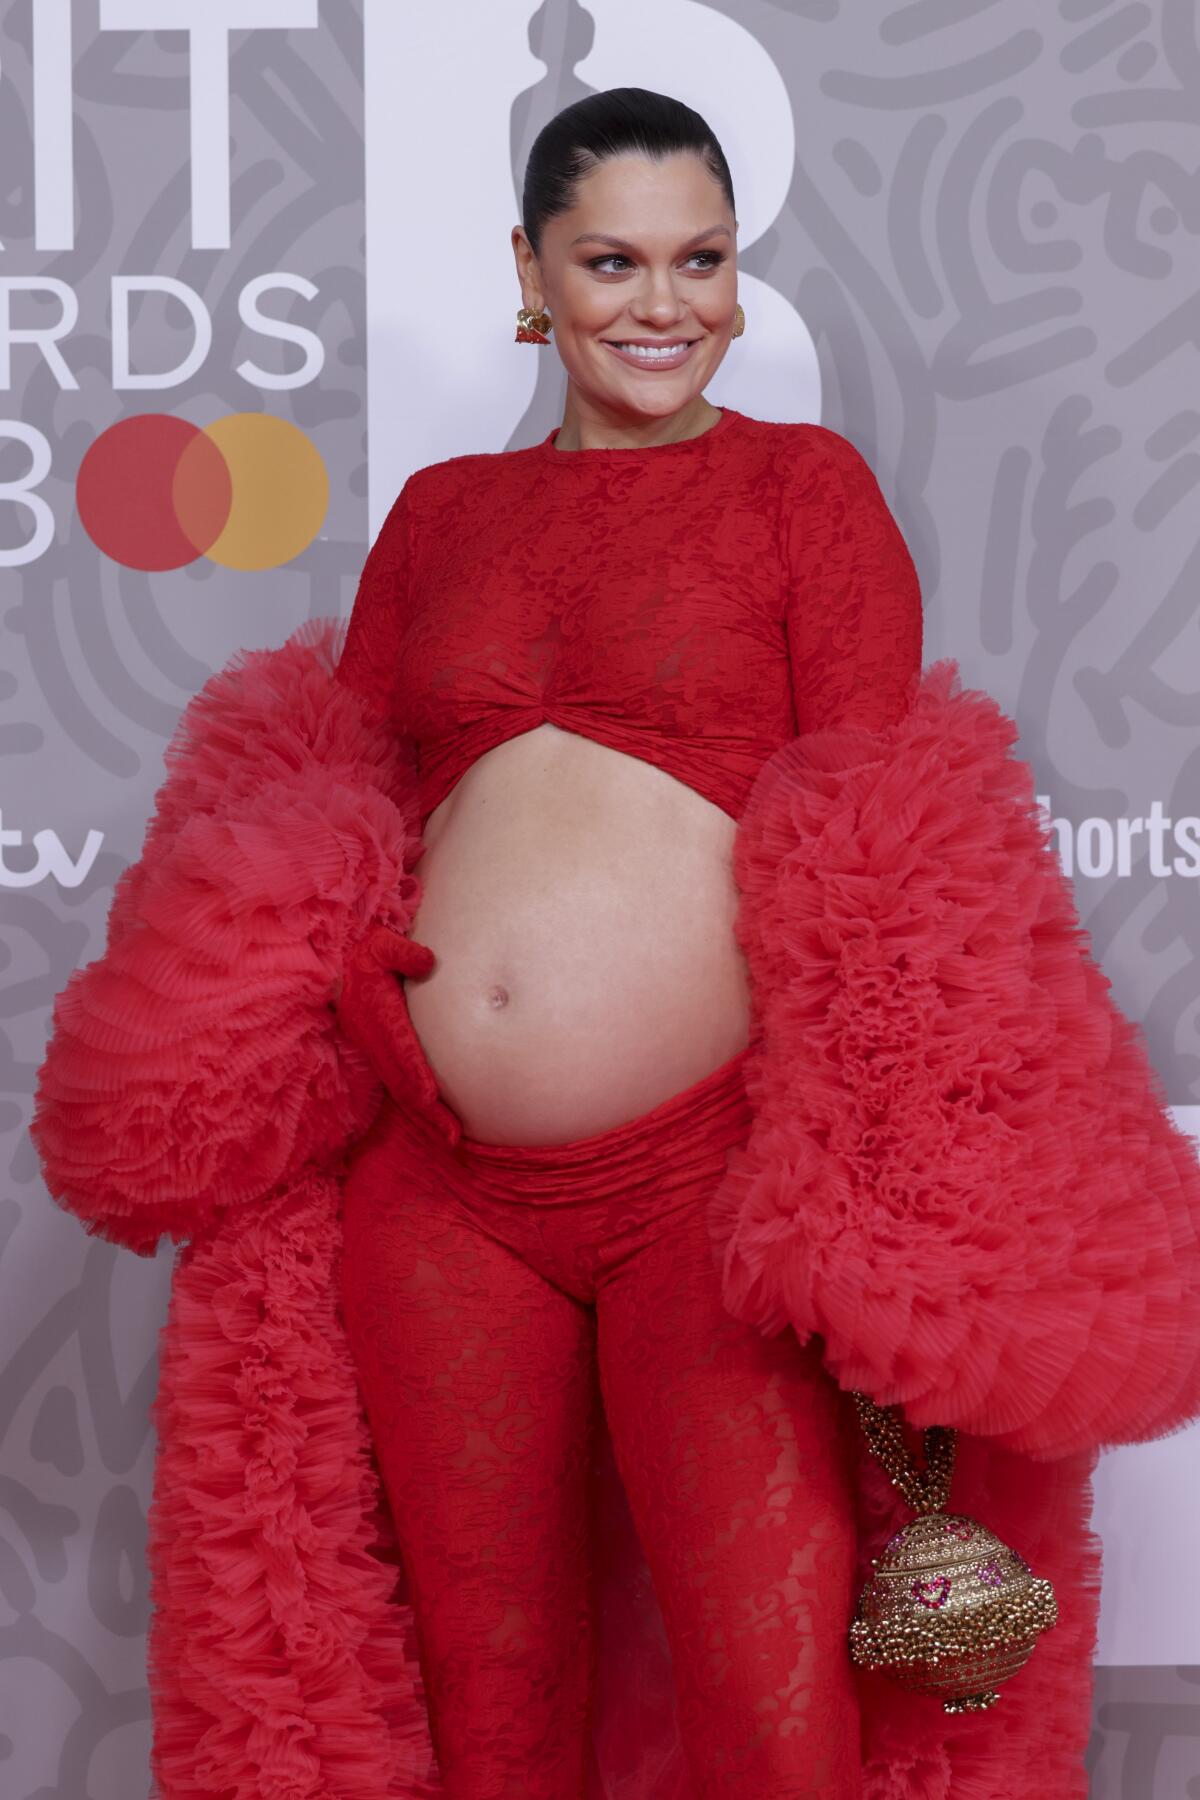 Jessie J poses in a lacy red ensemble with a fluffy red coat and a cutout revealing her pregnant belly 